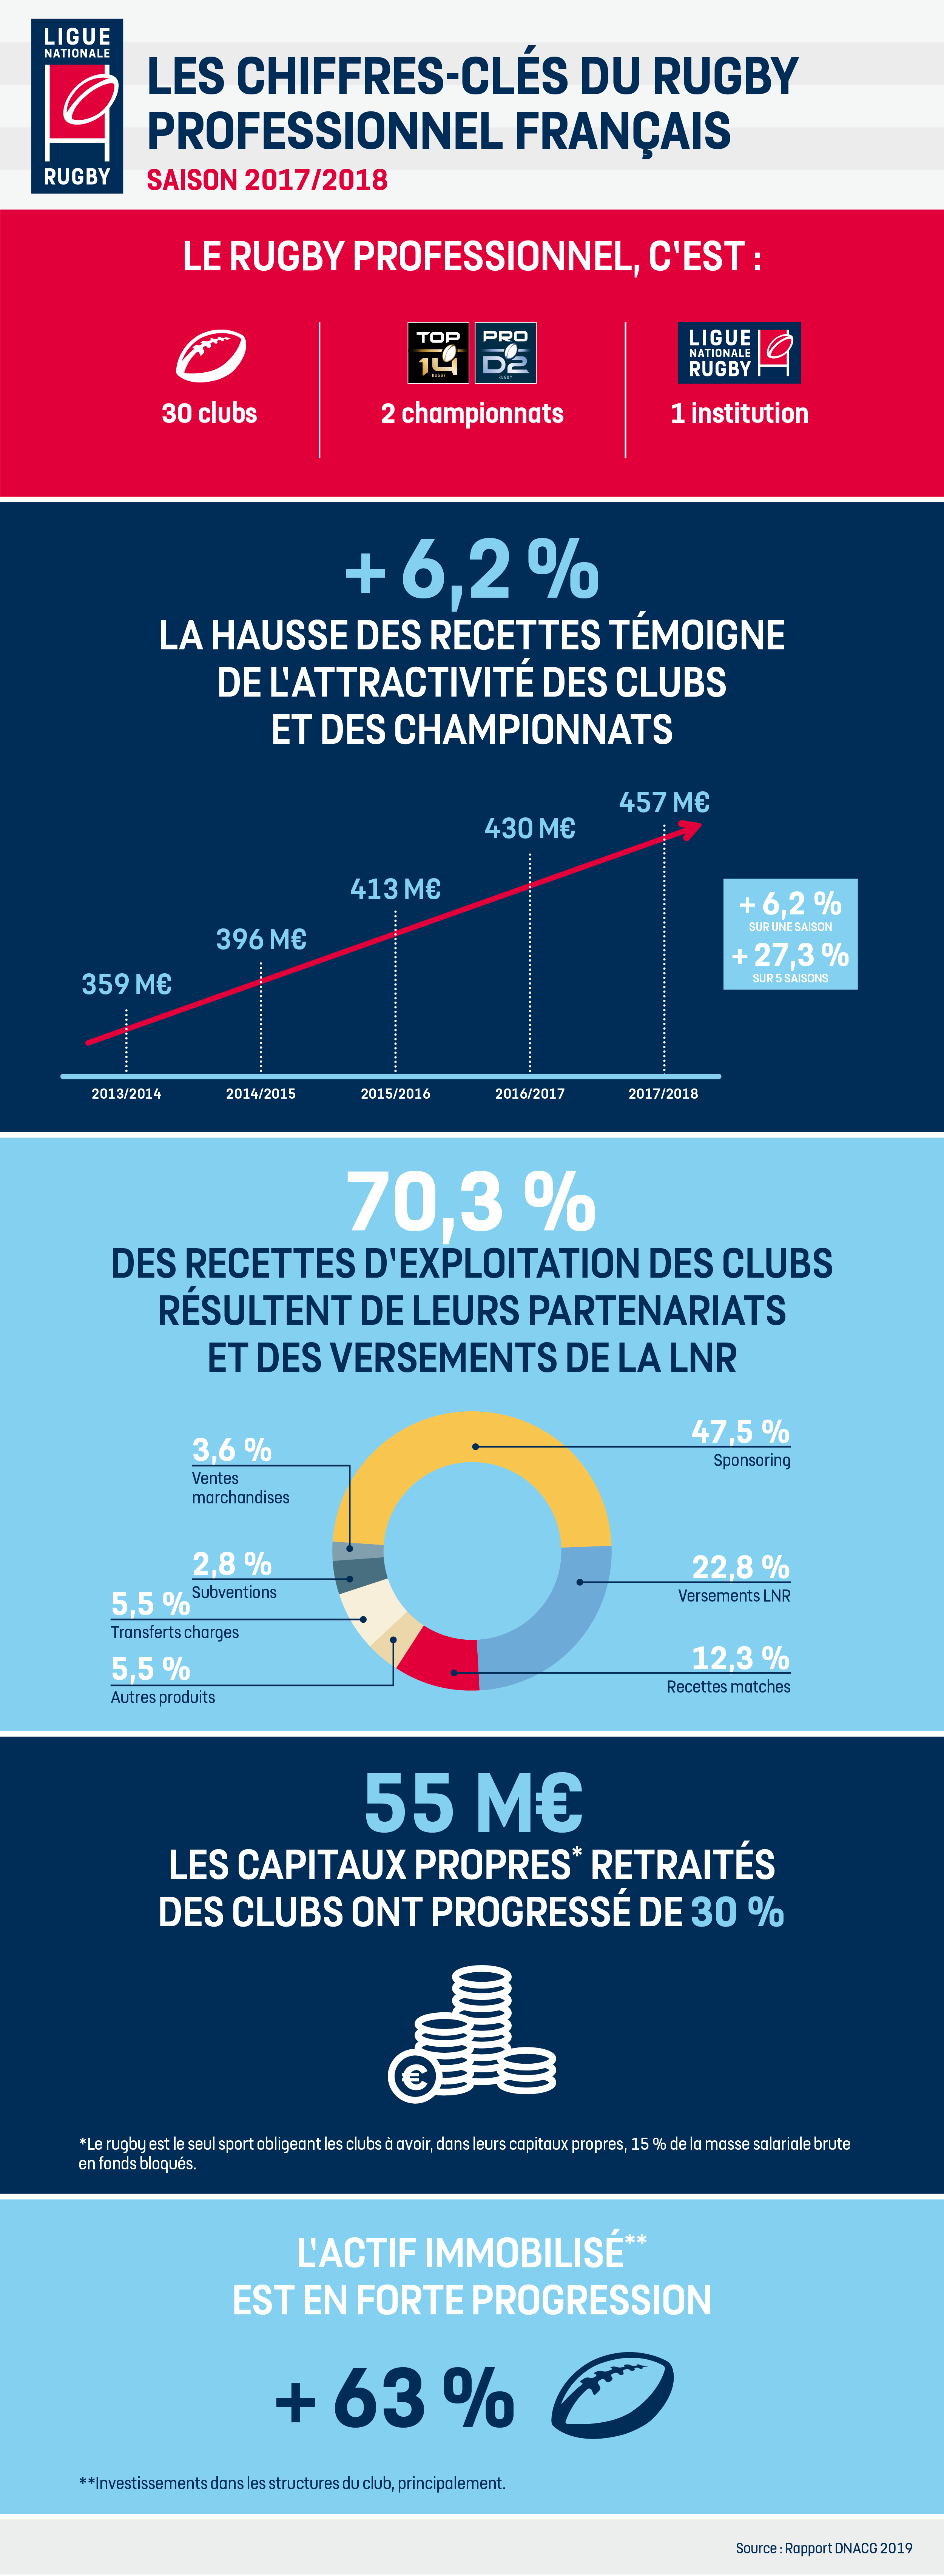 Infographie Rapport DNACG 2019.png